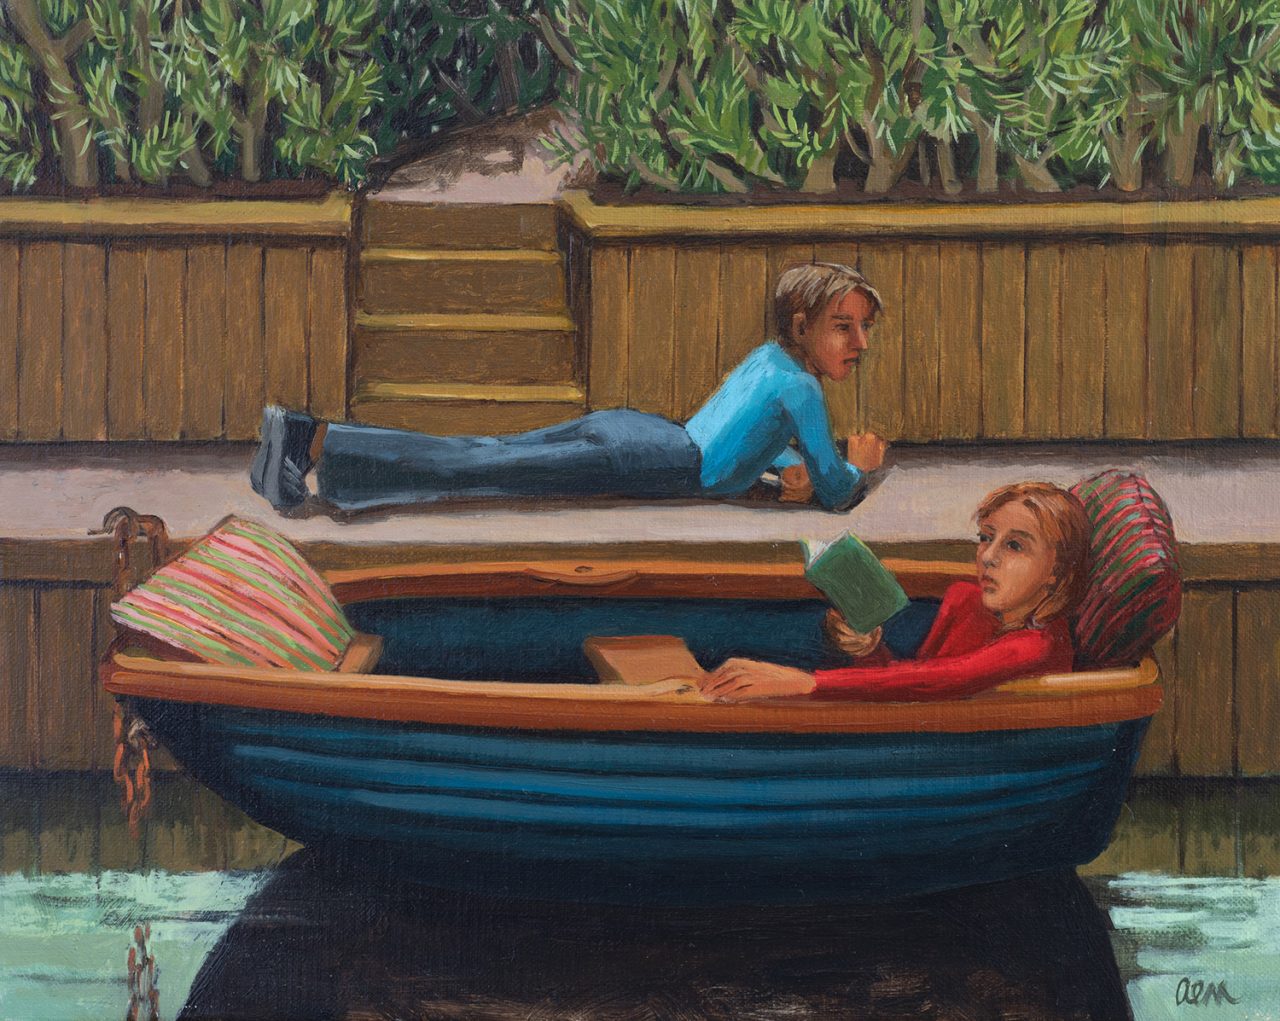 Oil painting by Ann McCay of a young boy talking to a girl in a boat, 44 x 38cm framed size